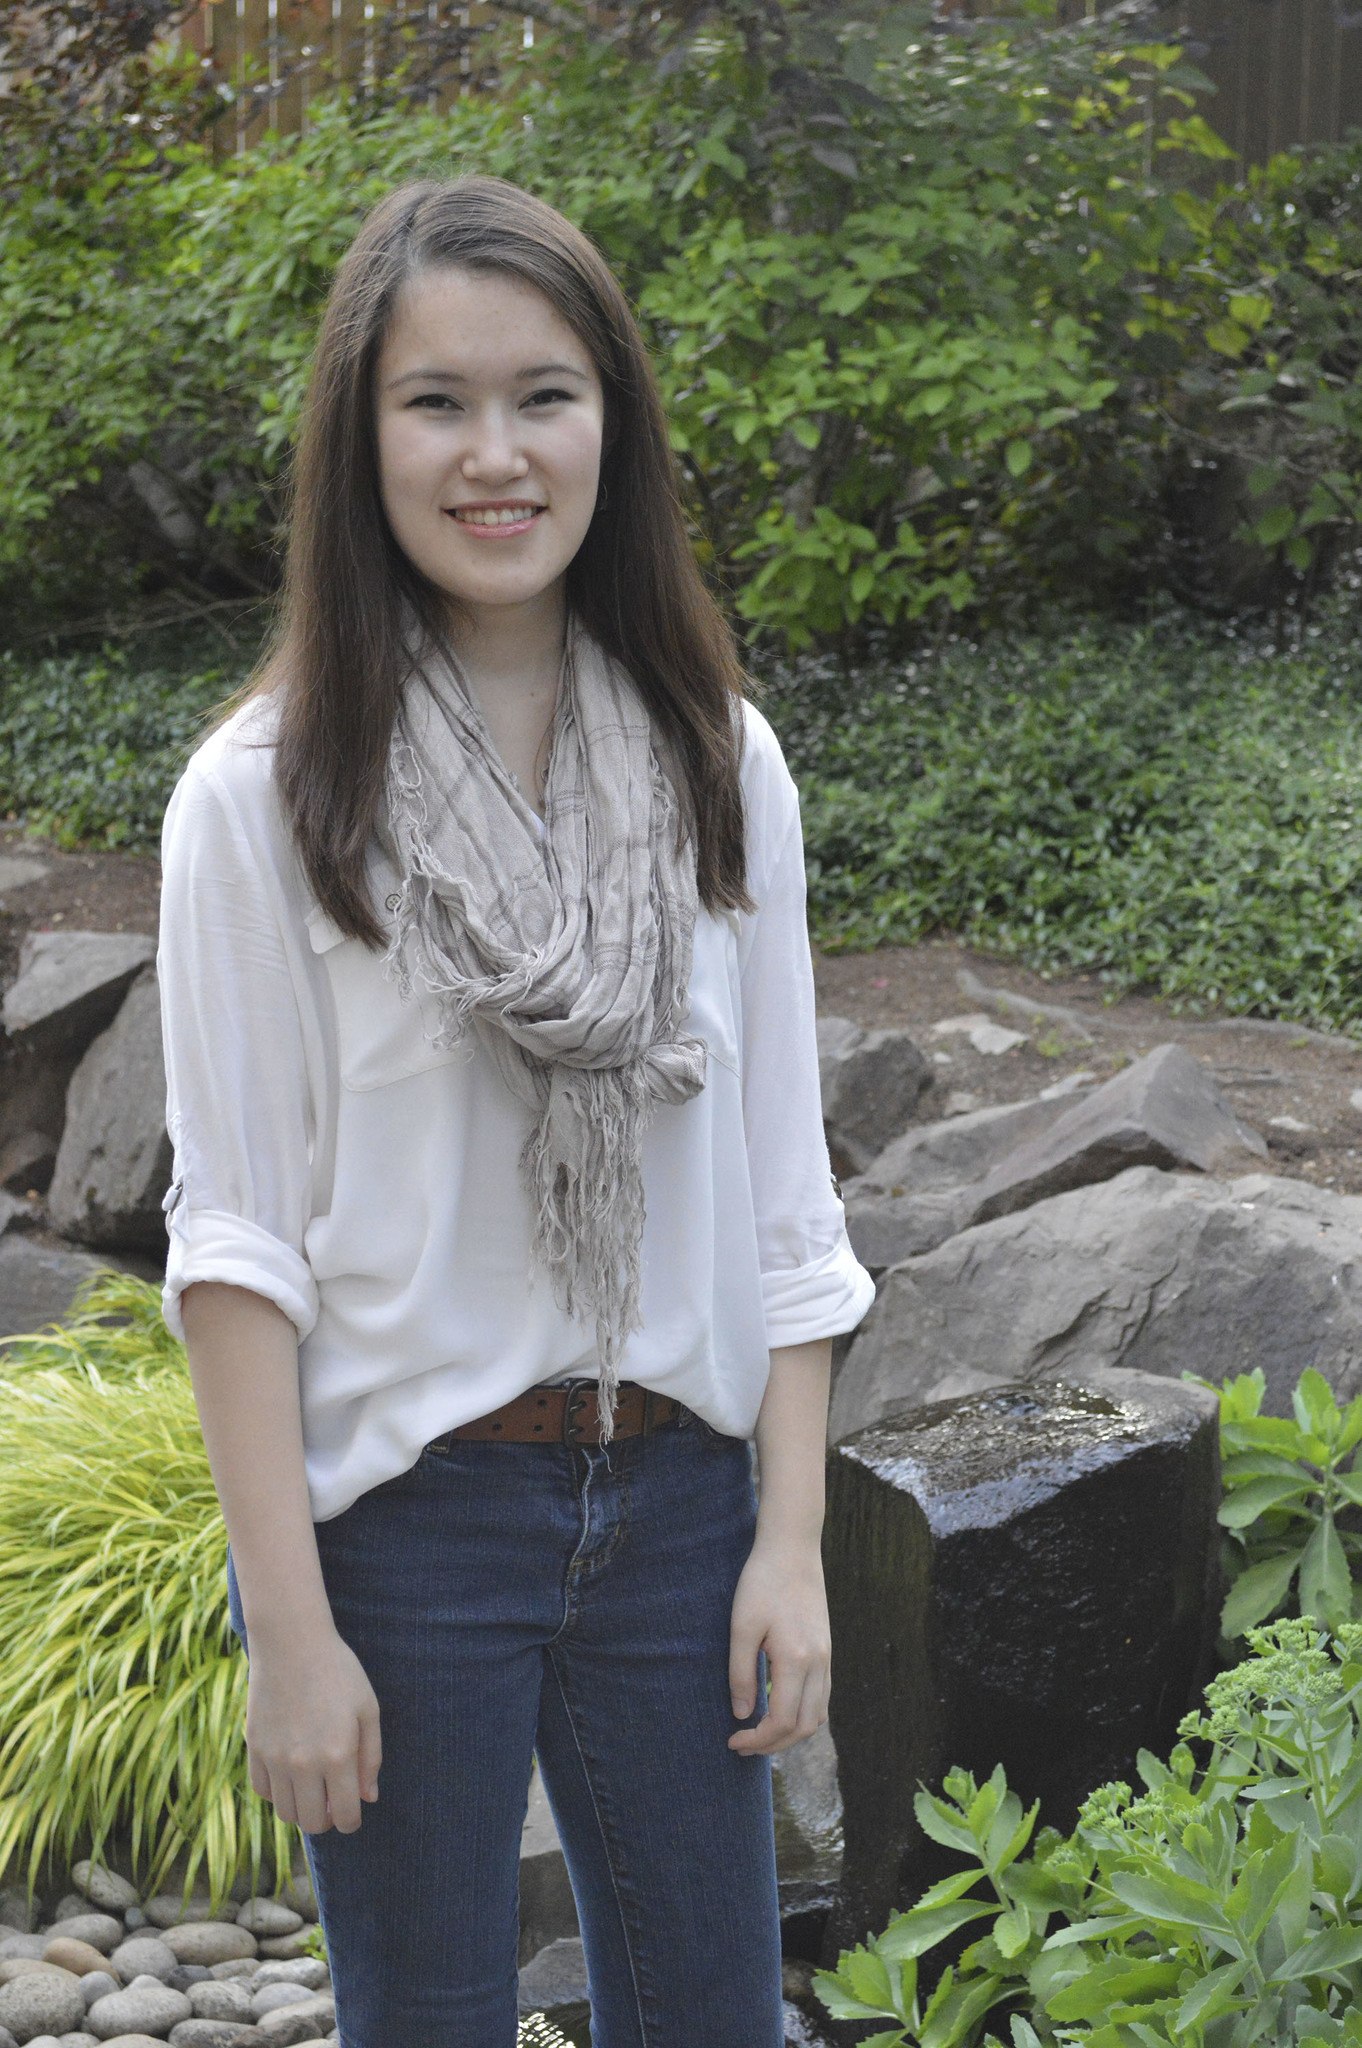 Jaime Cantwell will travel to China this summer for a Mandarin language-immersion program. Courtesy photo